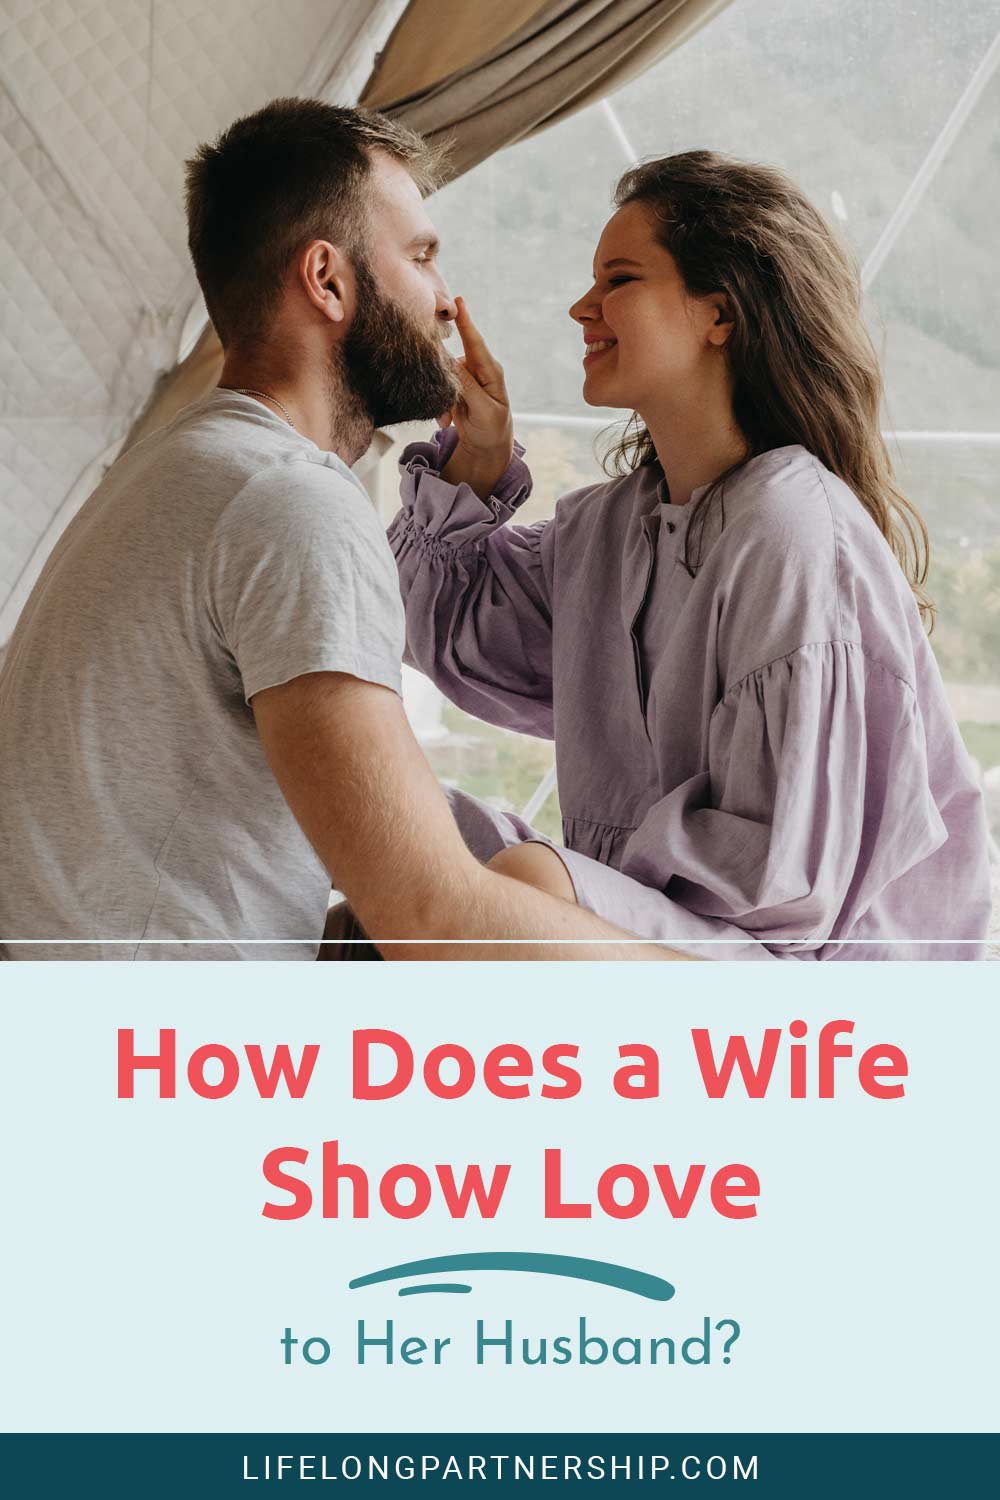 How Does a Wife Show Love to Her Husband?